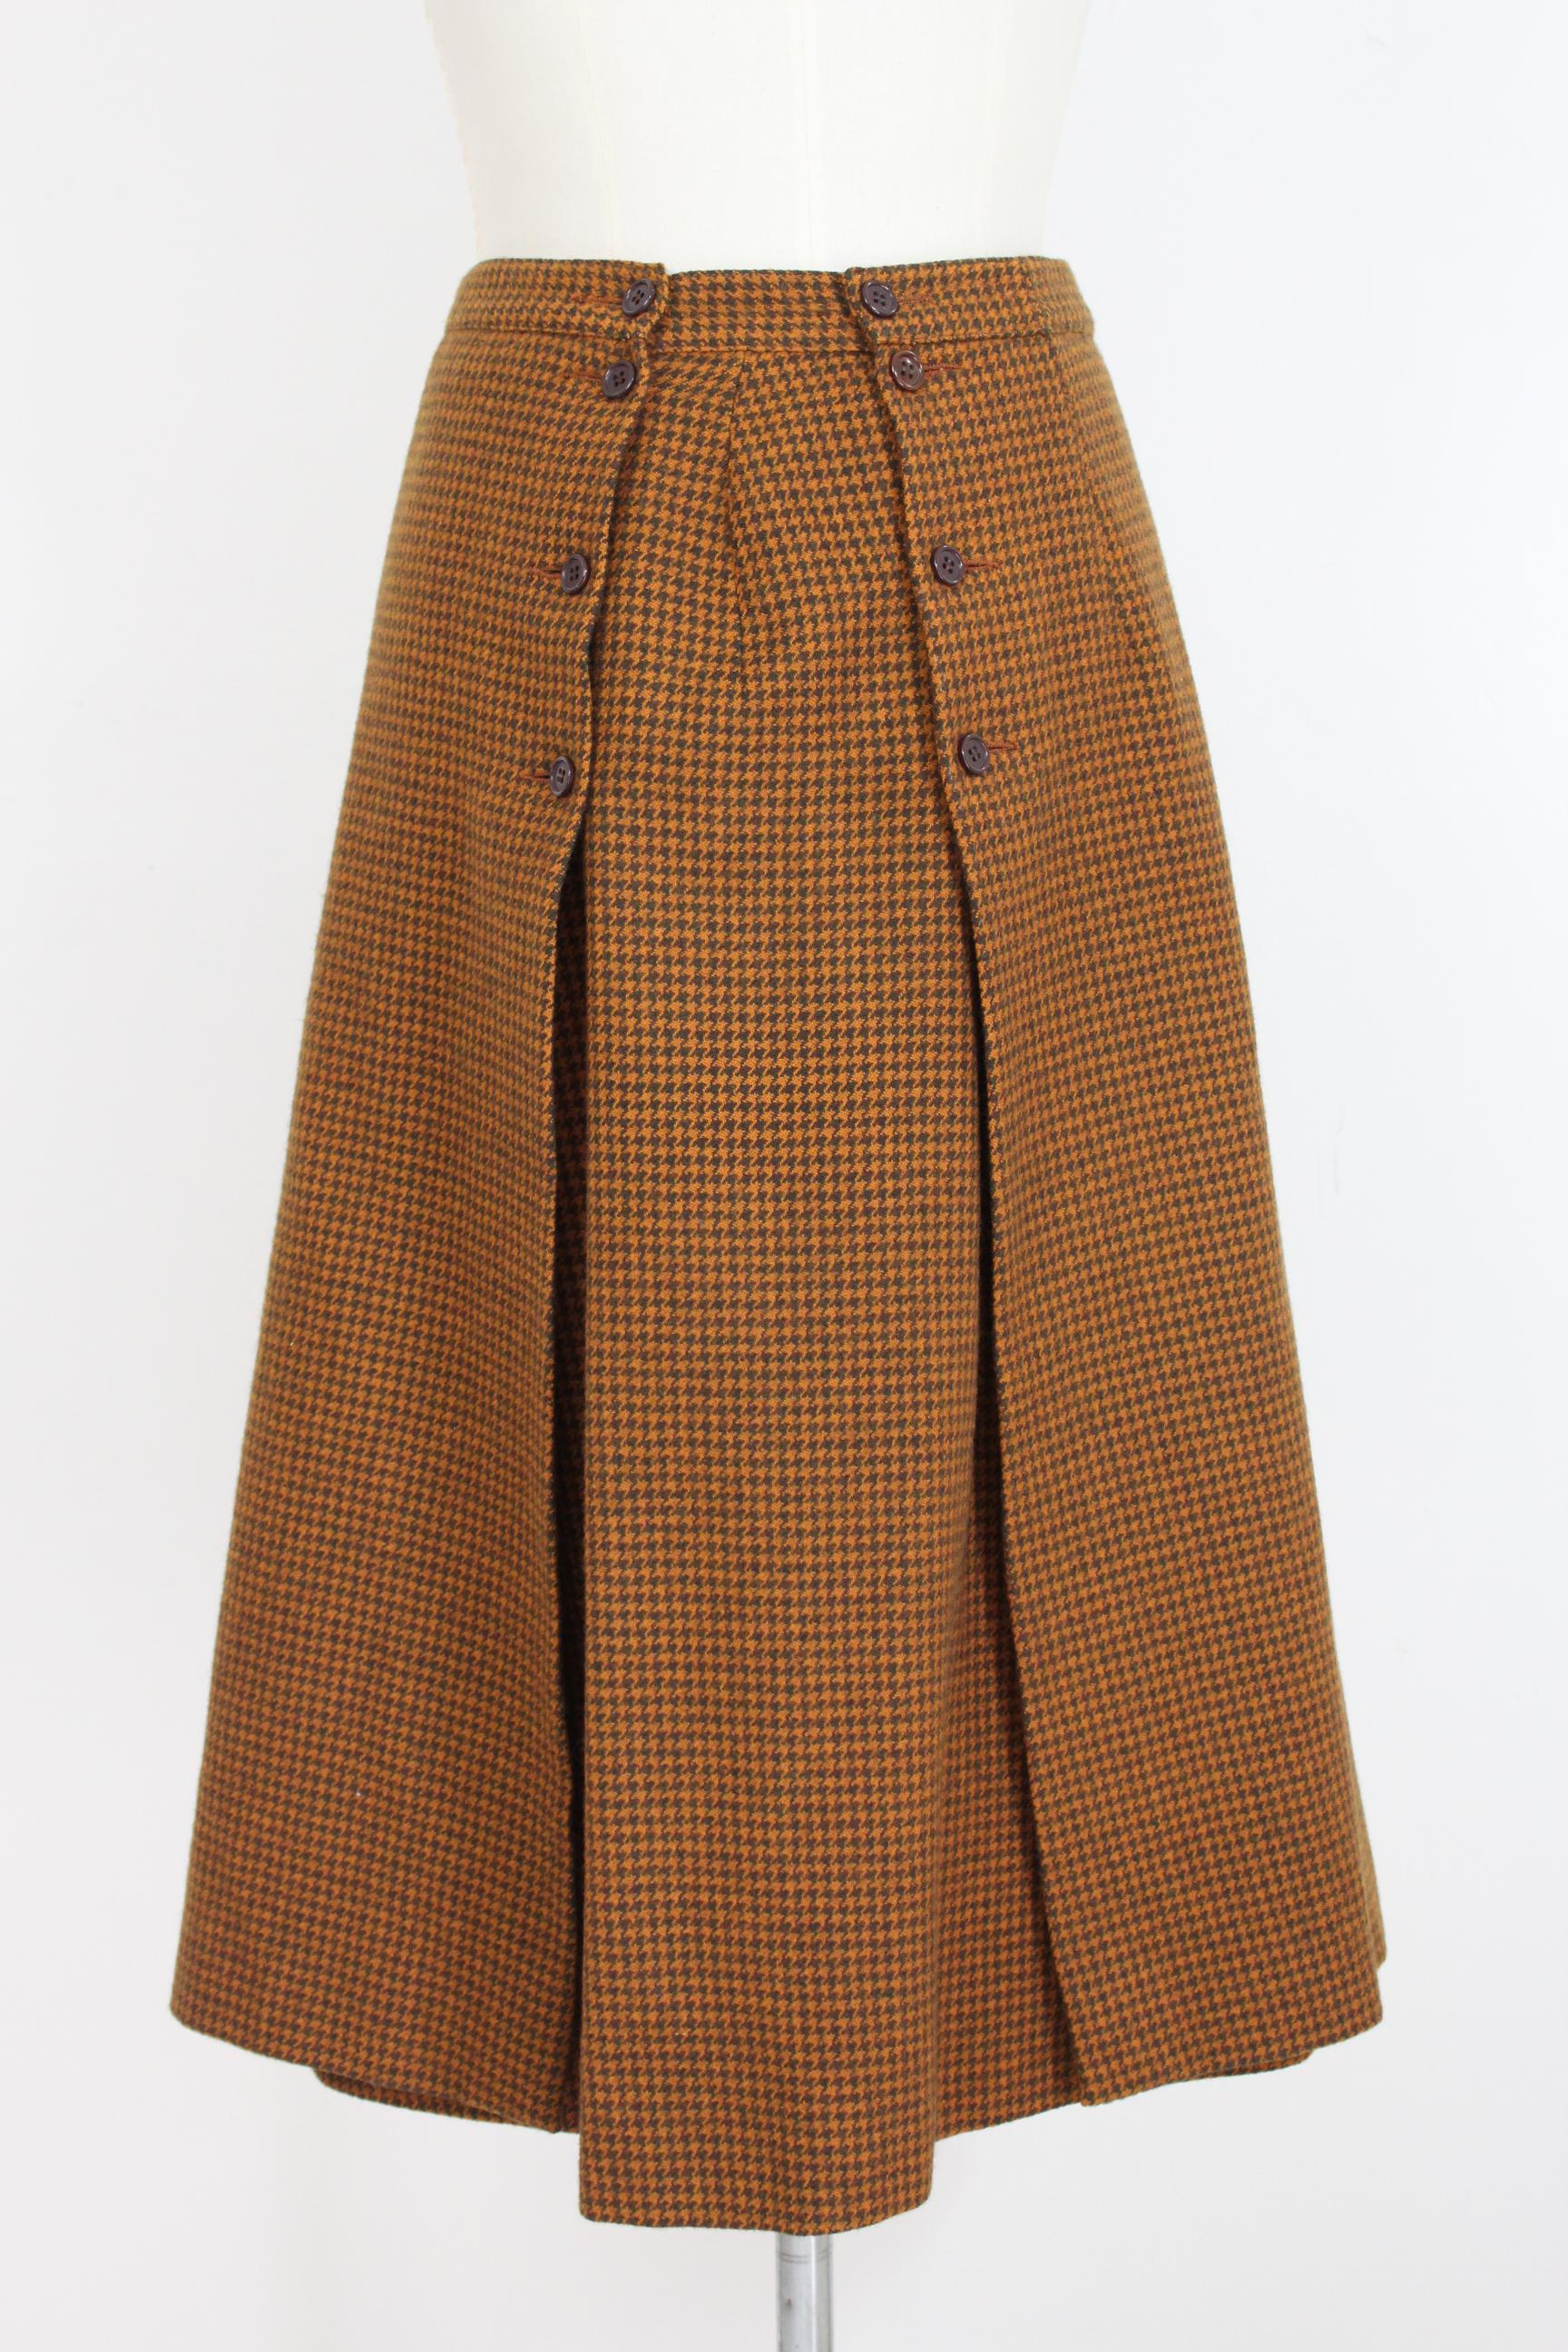 Valentino Miss V Beige Brown Wool Check Double Breasted Jacket Skirt Suit  In Excellent Condition In Brindisi, Bt